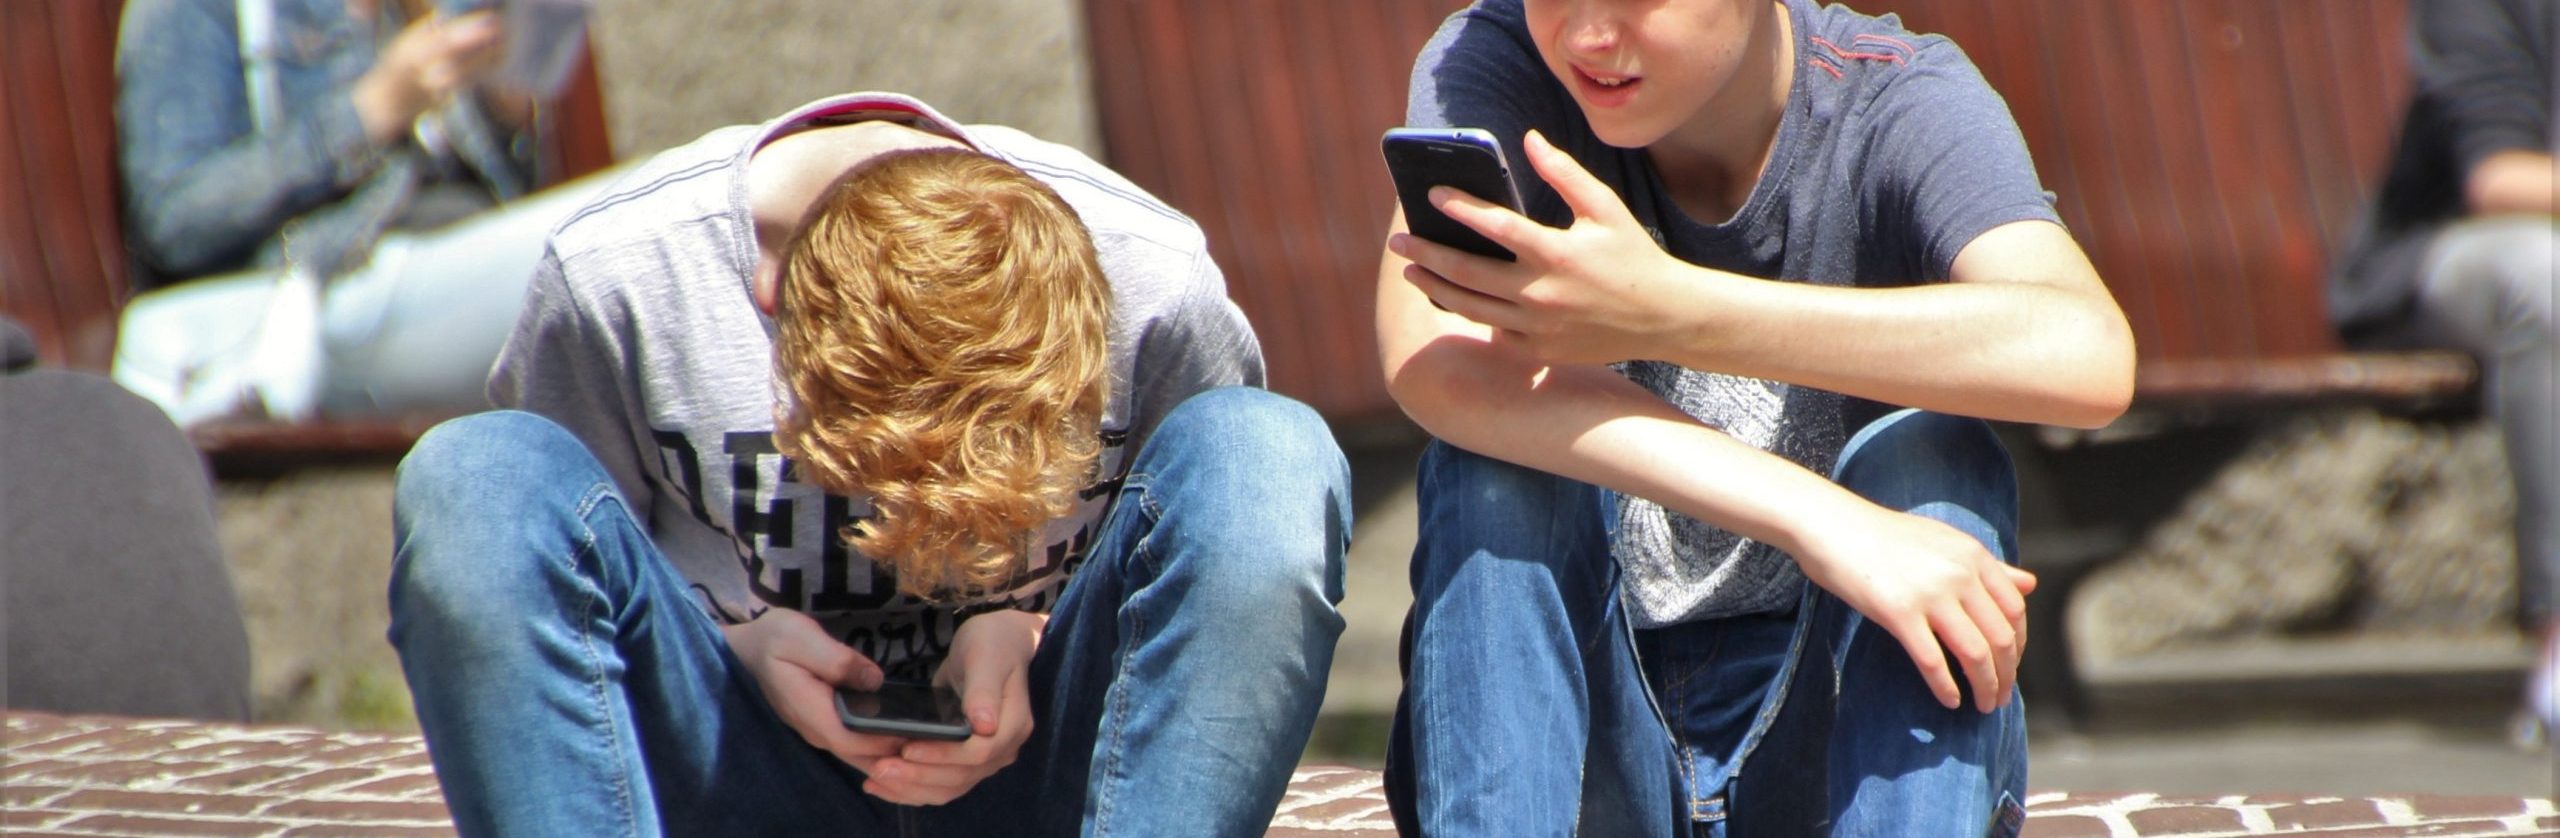 2-boy-sitting-on-brown-floor-while-using-their-smartphone-159395